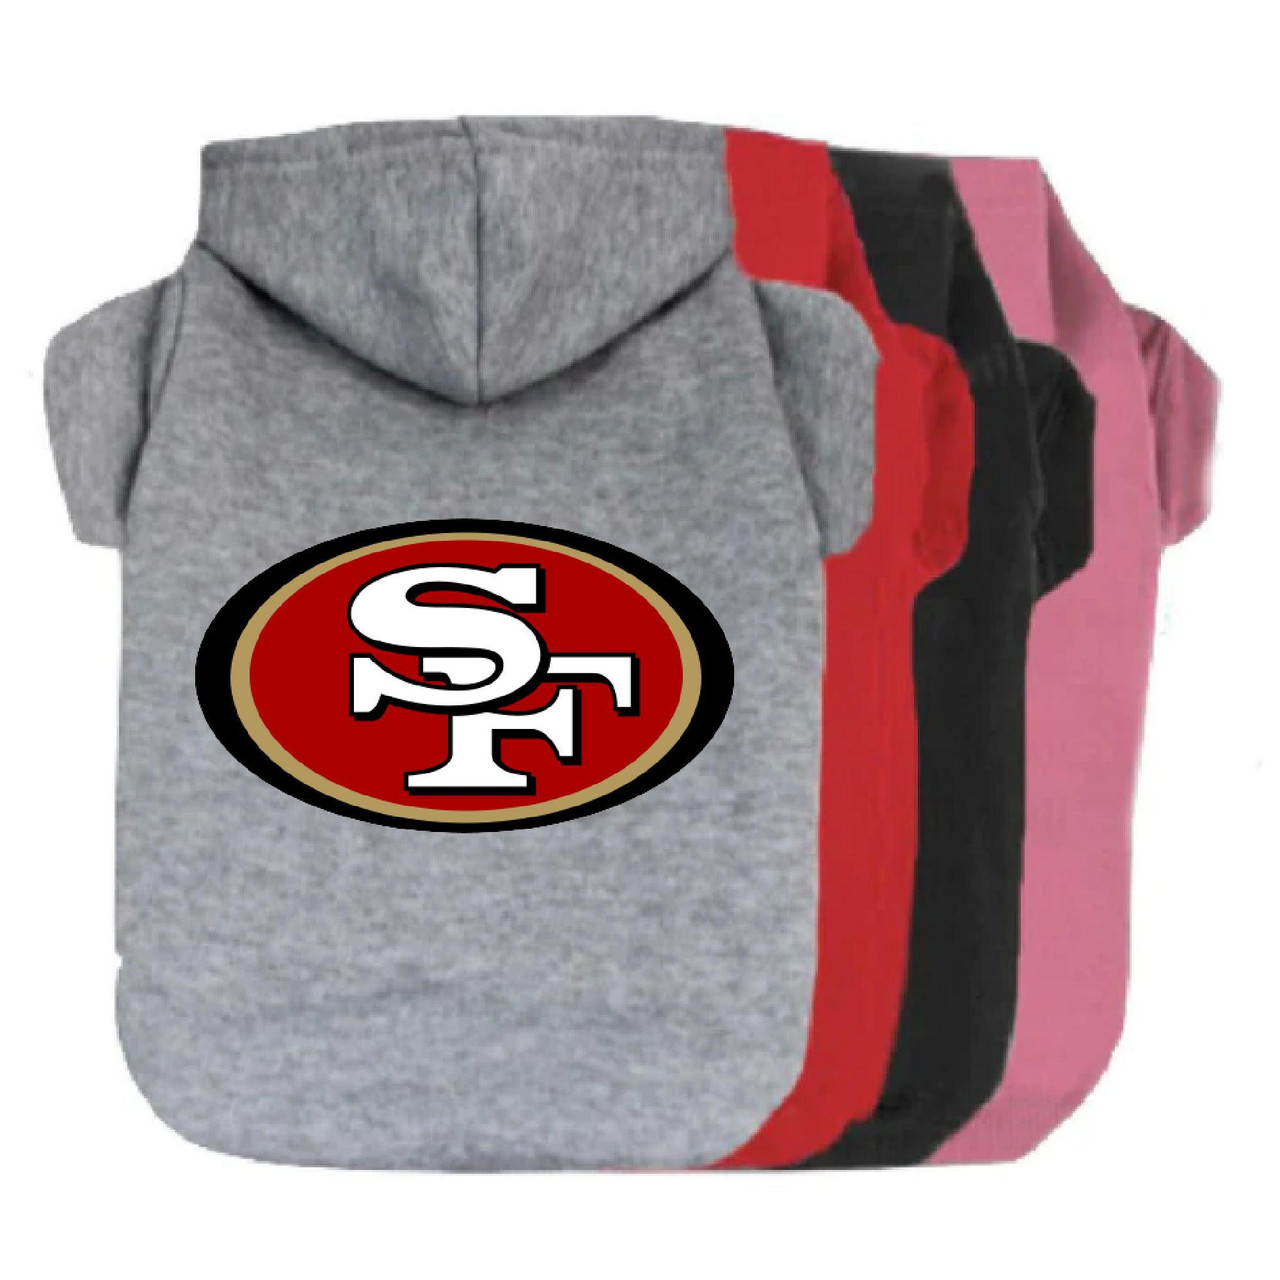 https://cdn11.bigcommerce.com/s-4o5sfkuije/images/stencil/1280w/products/976/5059/san-francisco-49ers-dog-hoodie-dog-hoodie-the-honest-dog__65264.1674835786.jpg